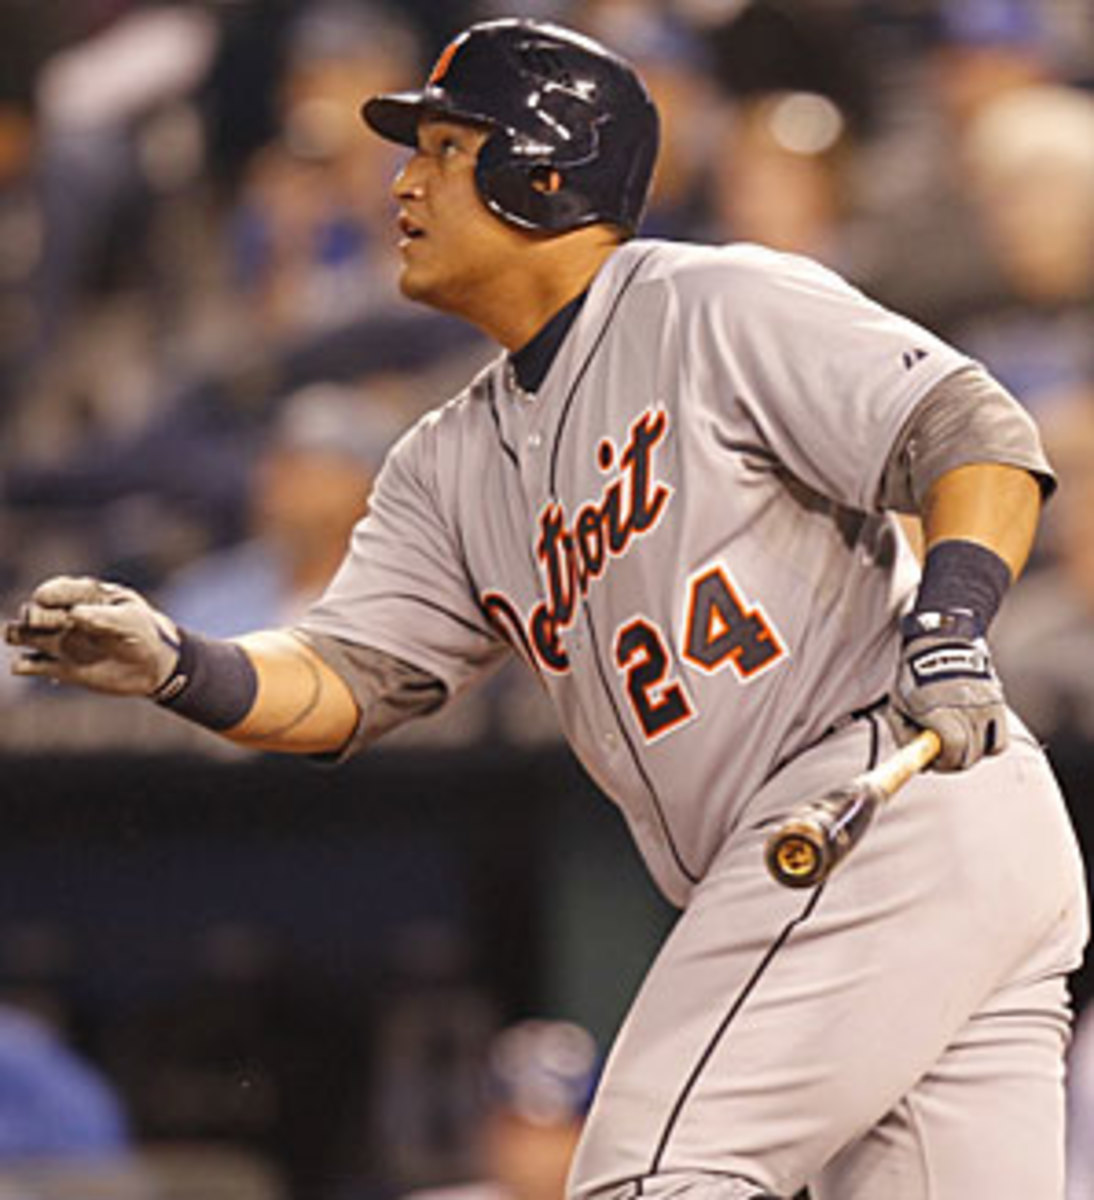 Miguel Cabrera Wins Triple Crown, First In 45 Years : The Two-Way